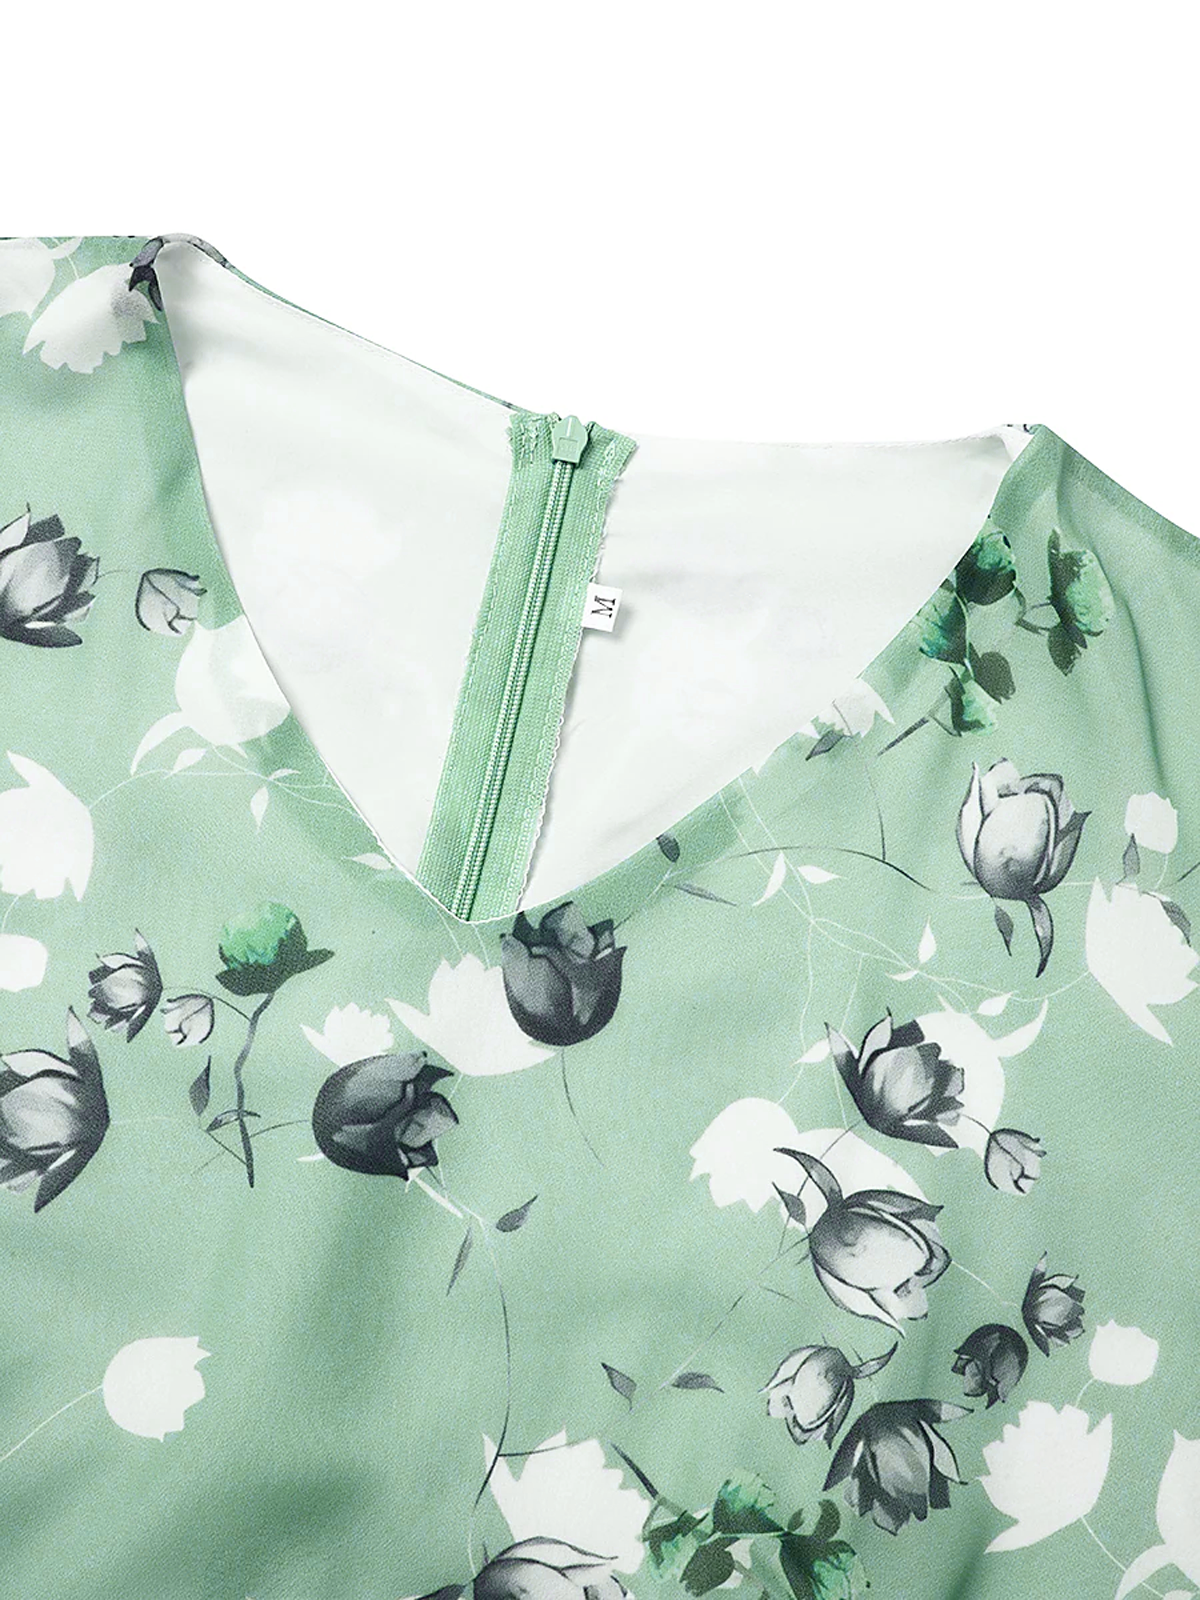 Women's Holiday sage green Dress Floral Chiffon Skirt Short Sleeve Floral Ruffle Spring Summer V Neck Fashion Daily Dating Vacation